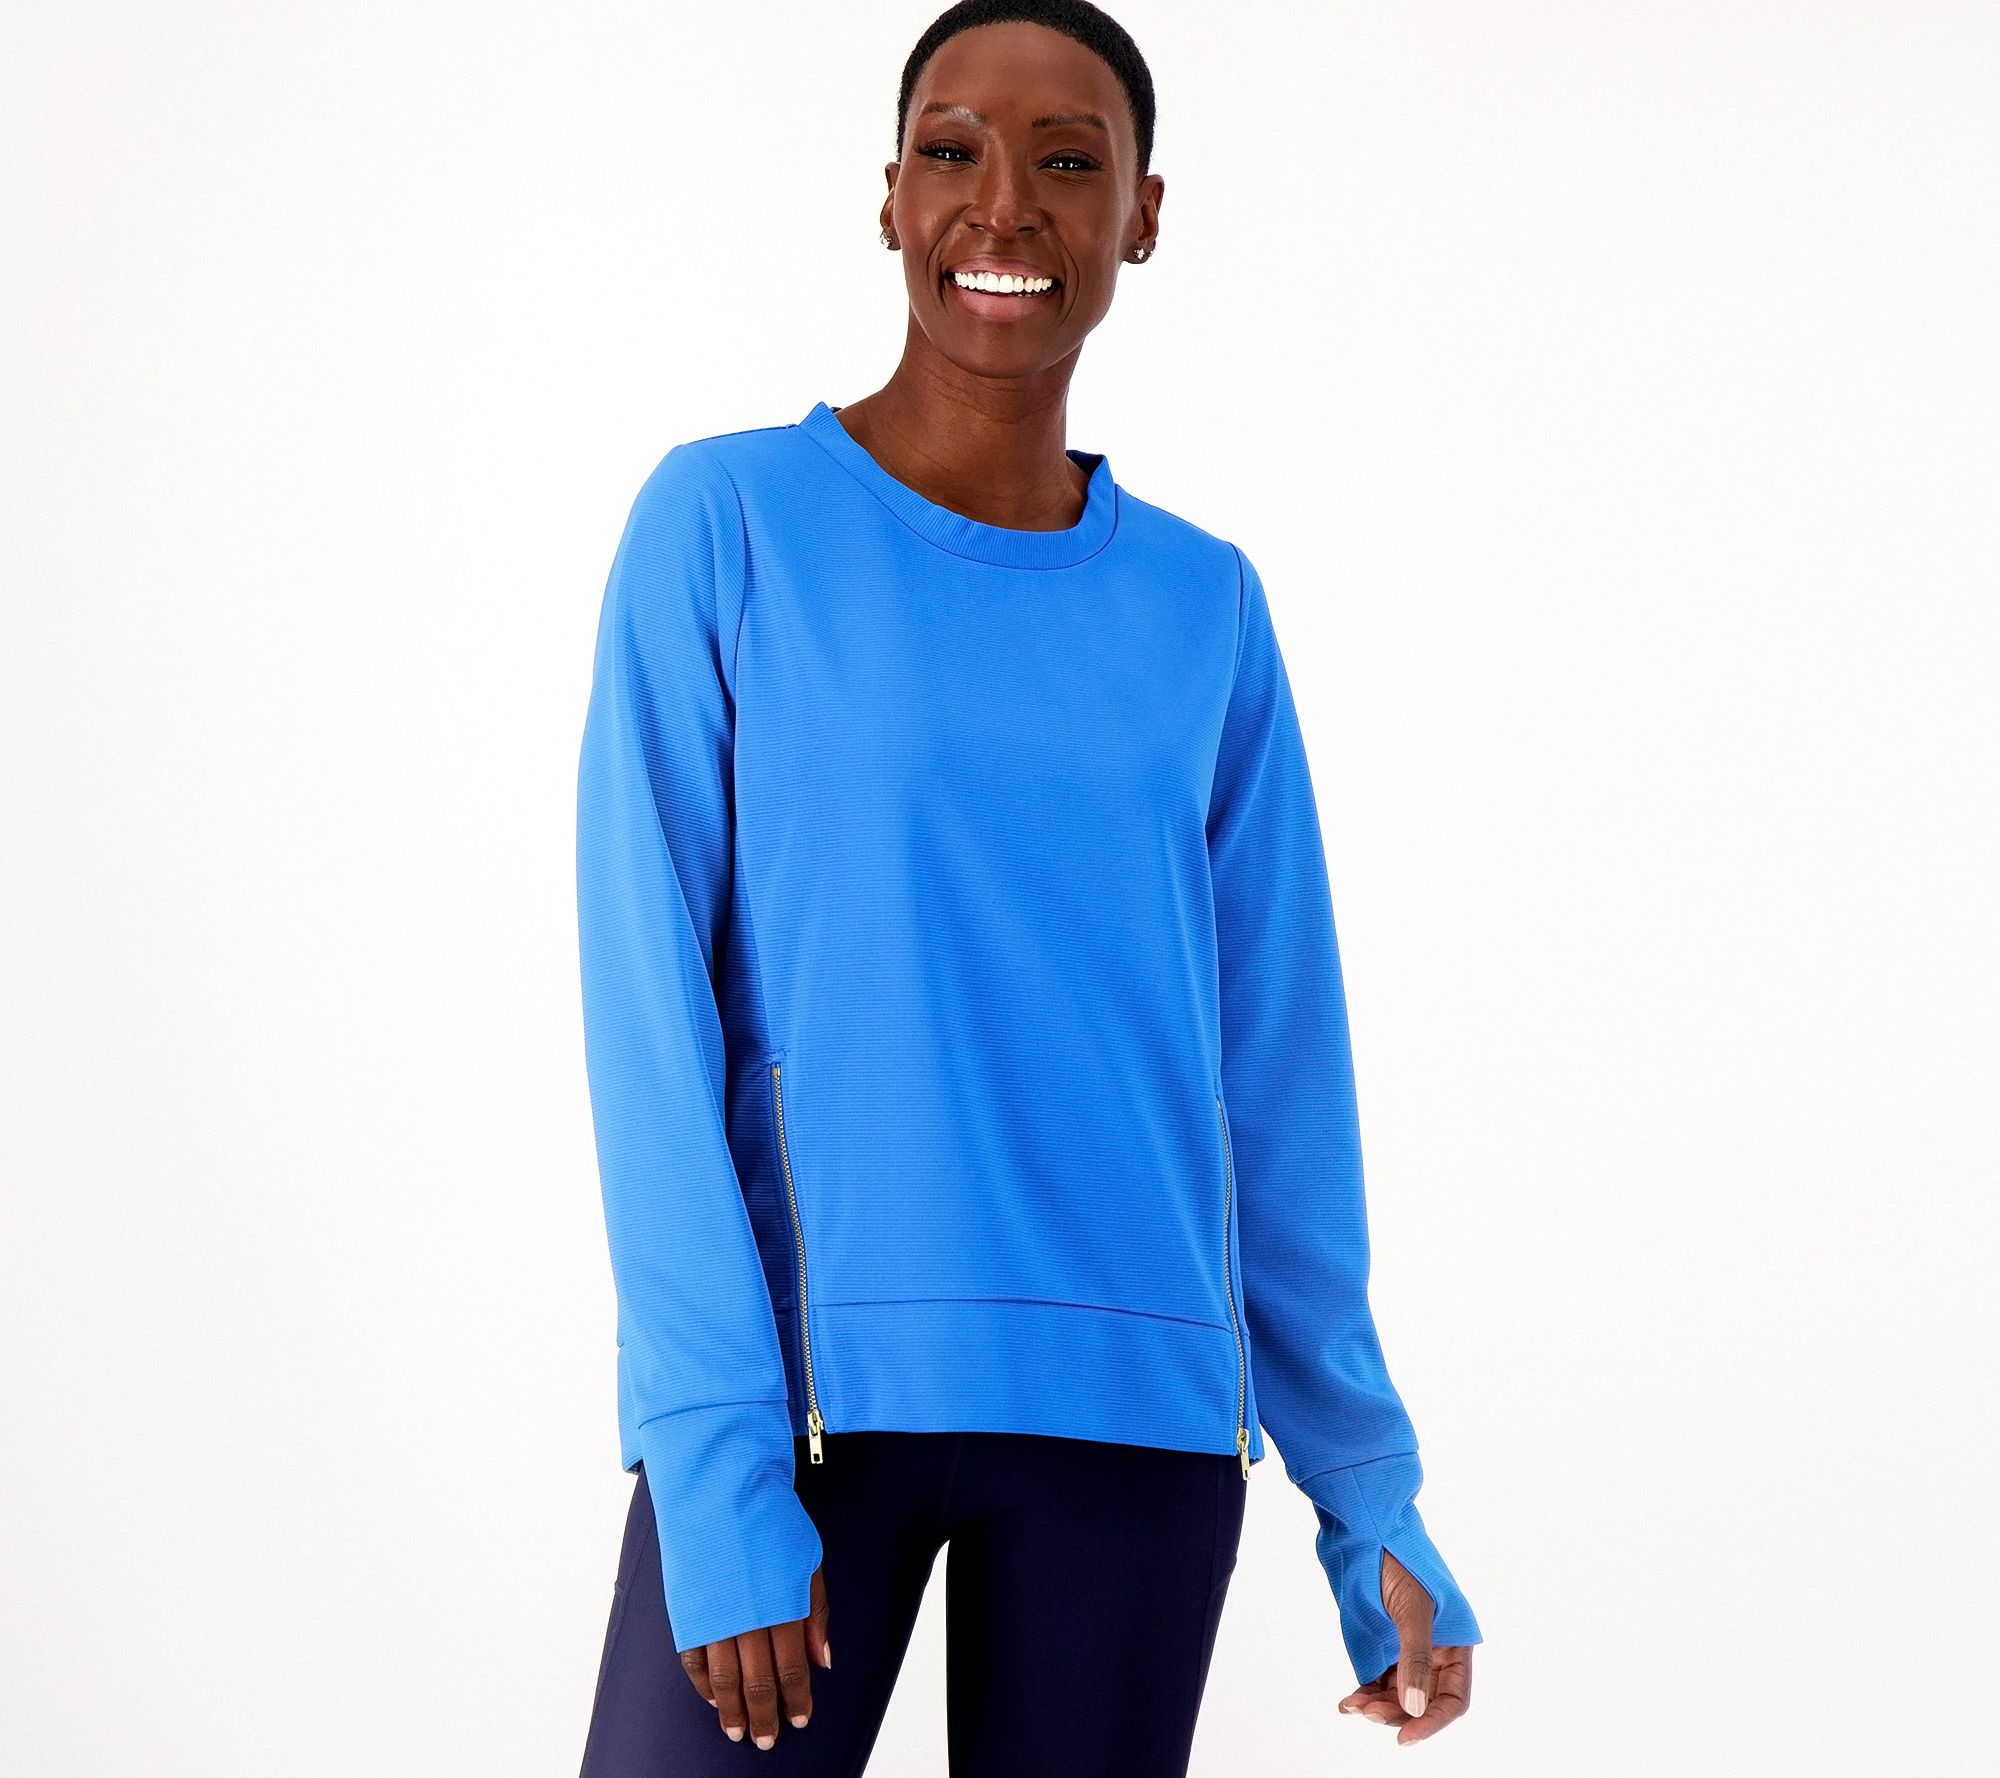 Addison Bay Just Launched a Chic Activewear Collection at QVC